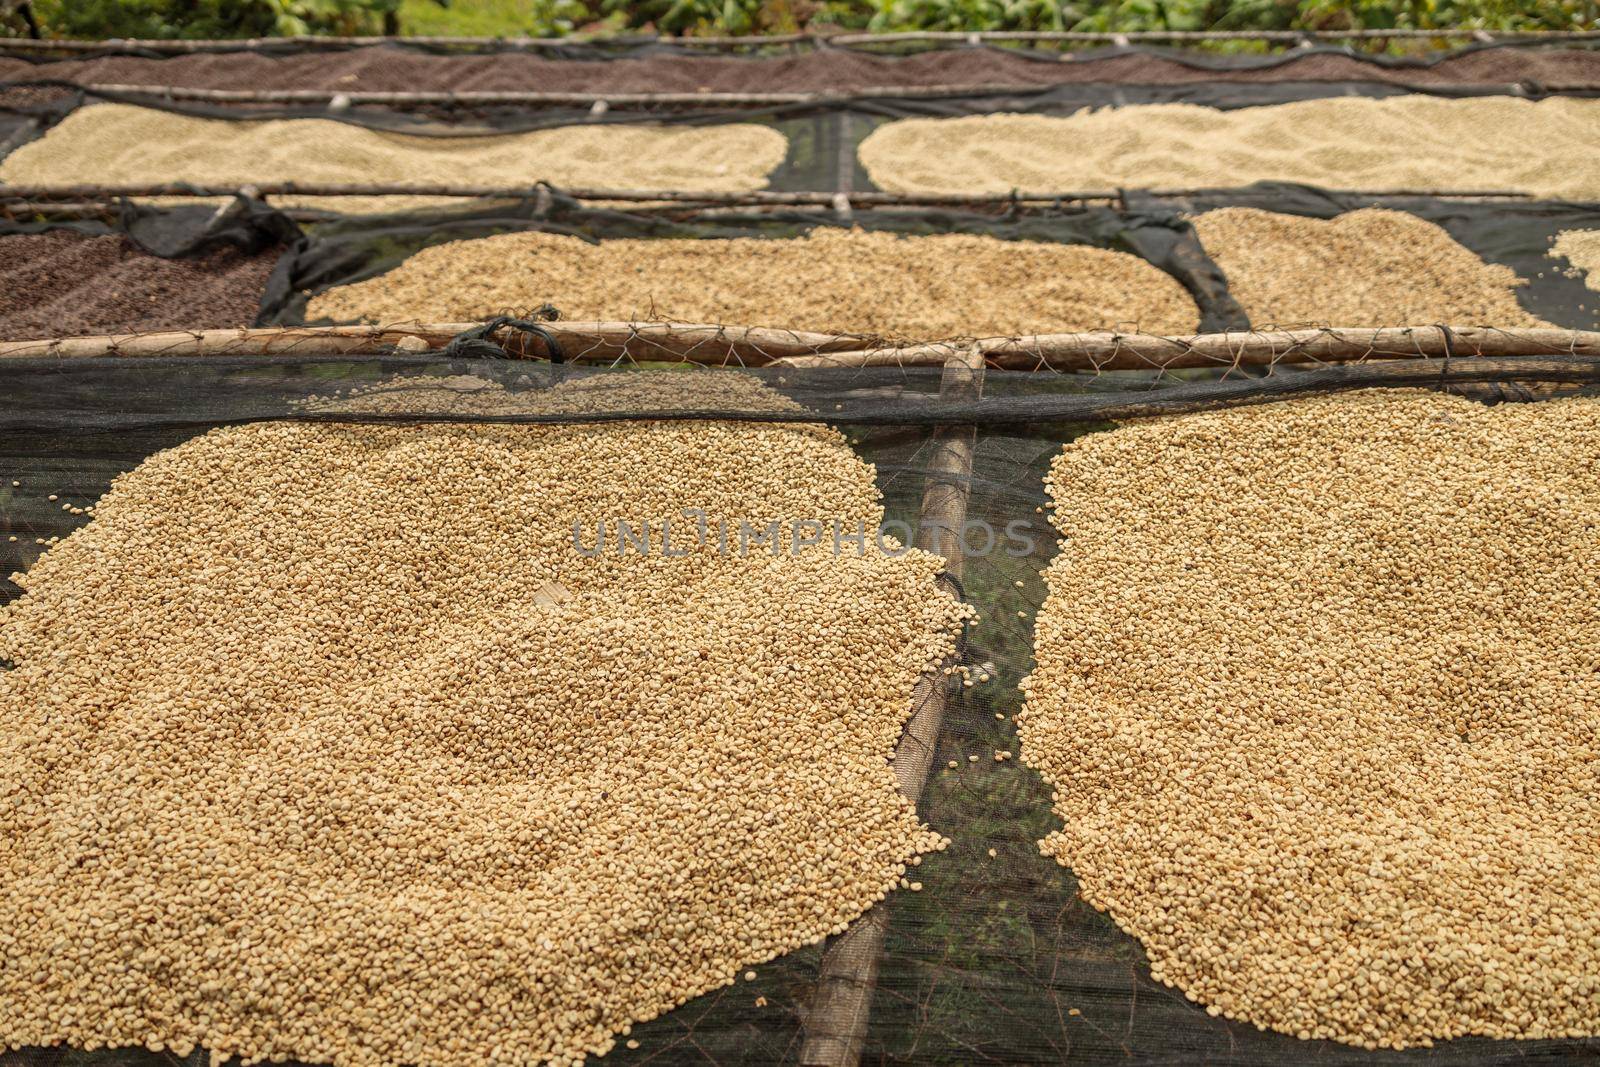 Top view of coffee beans at the stage of drying on the tables outdoors. Coffee production